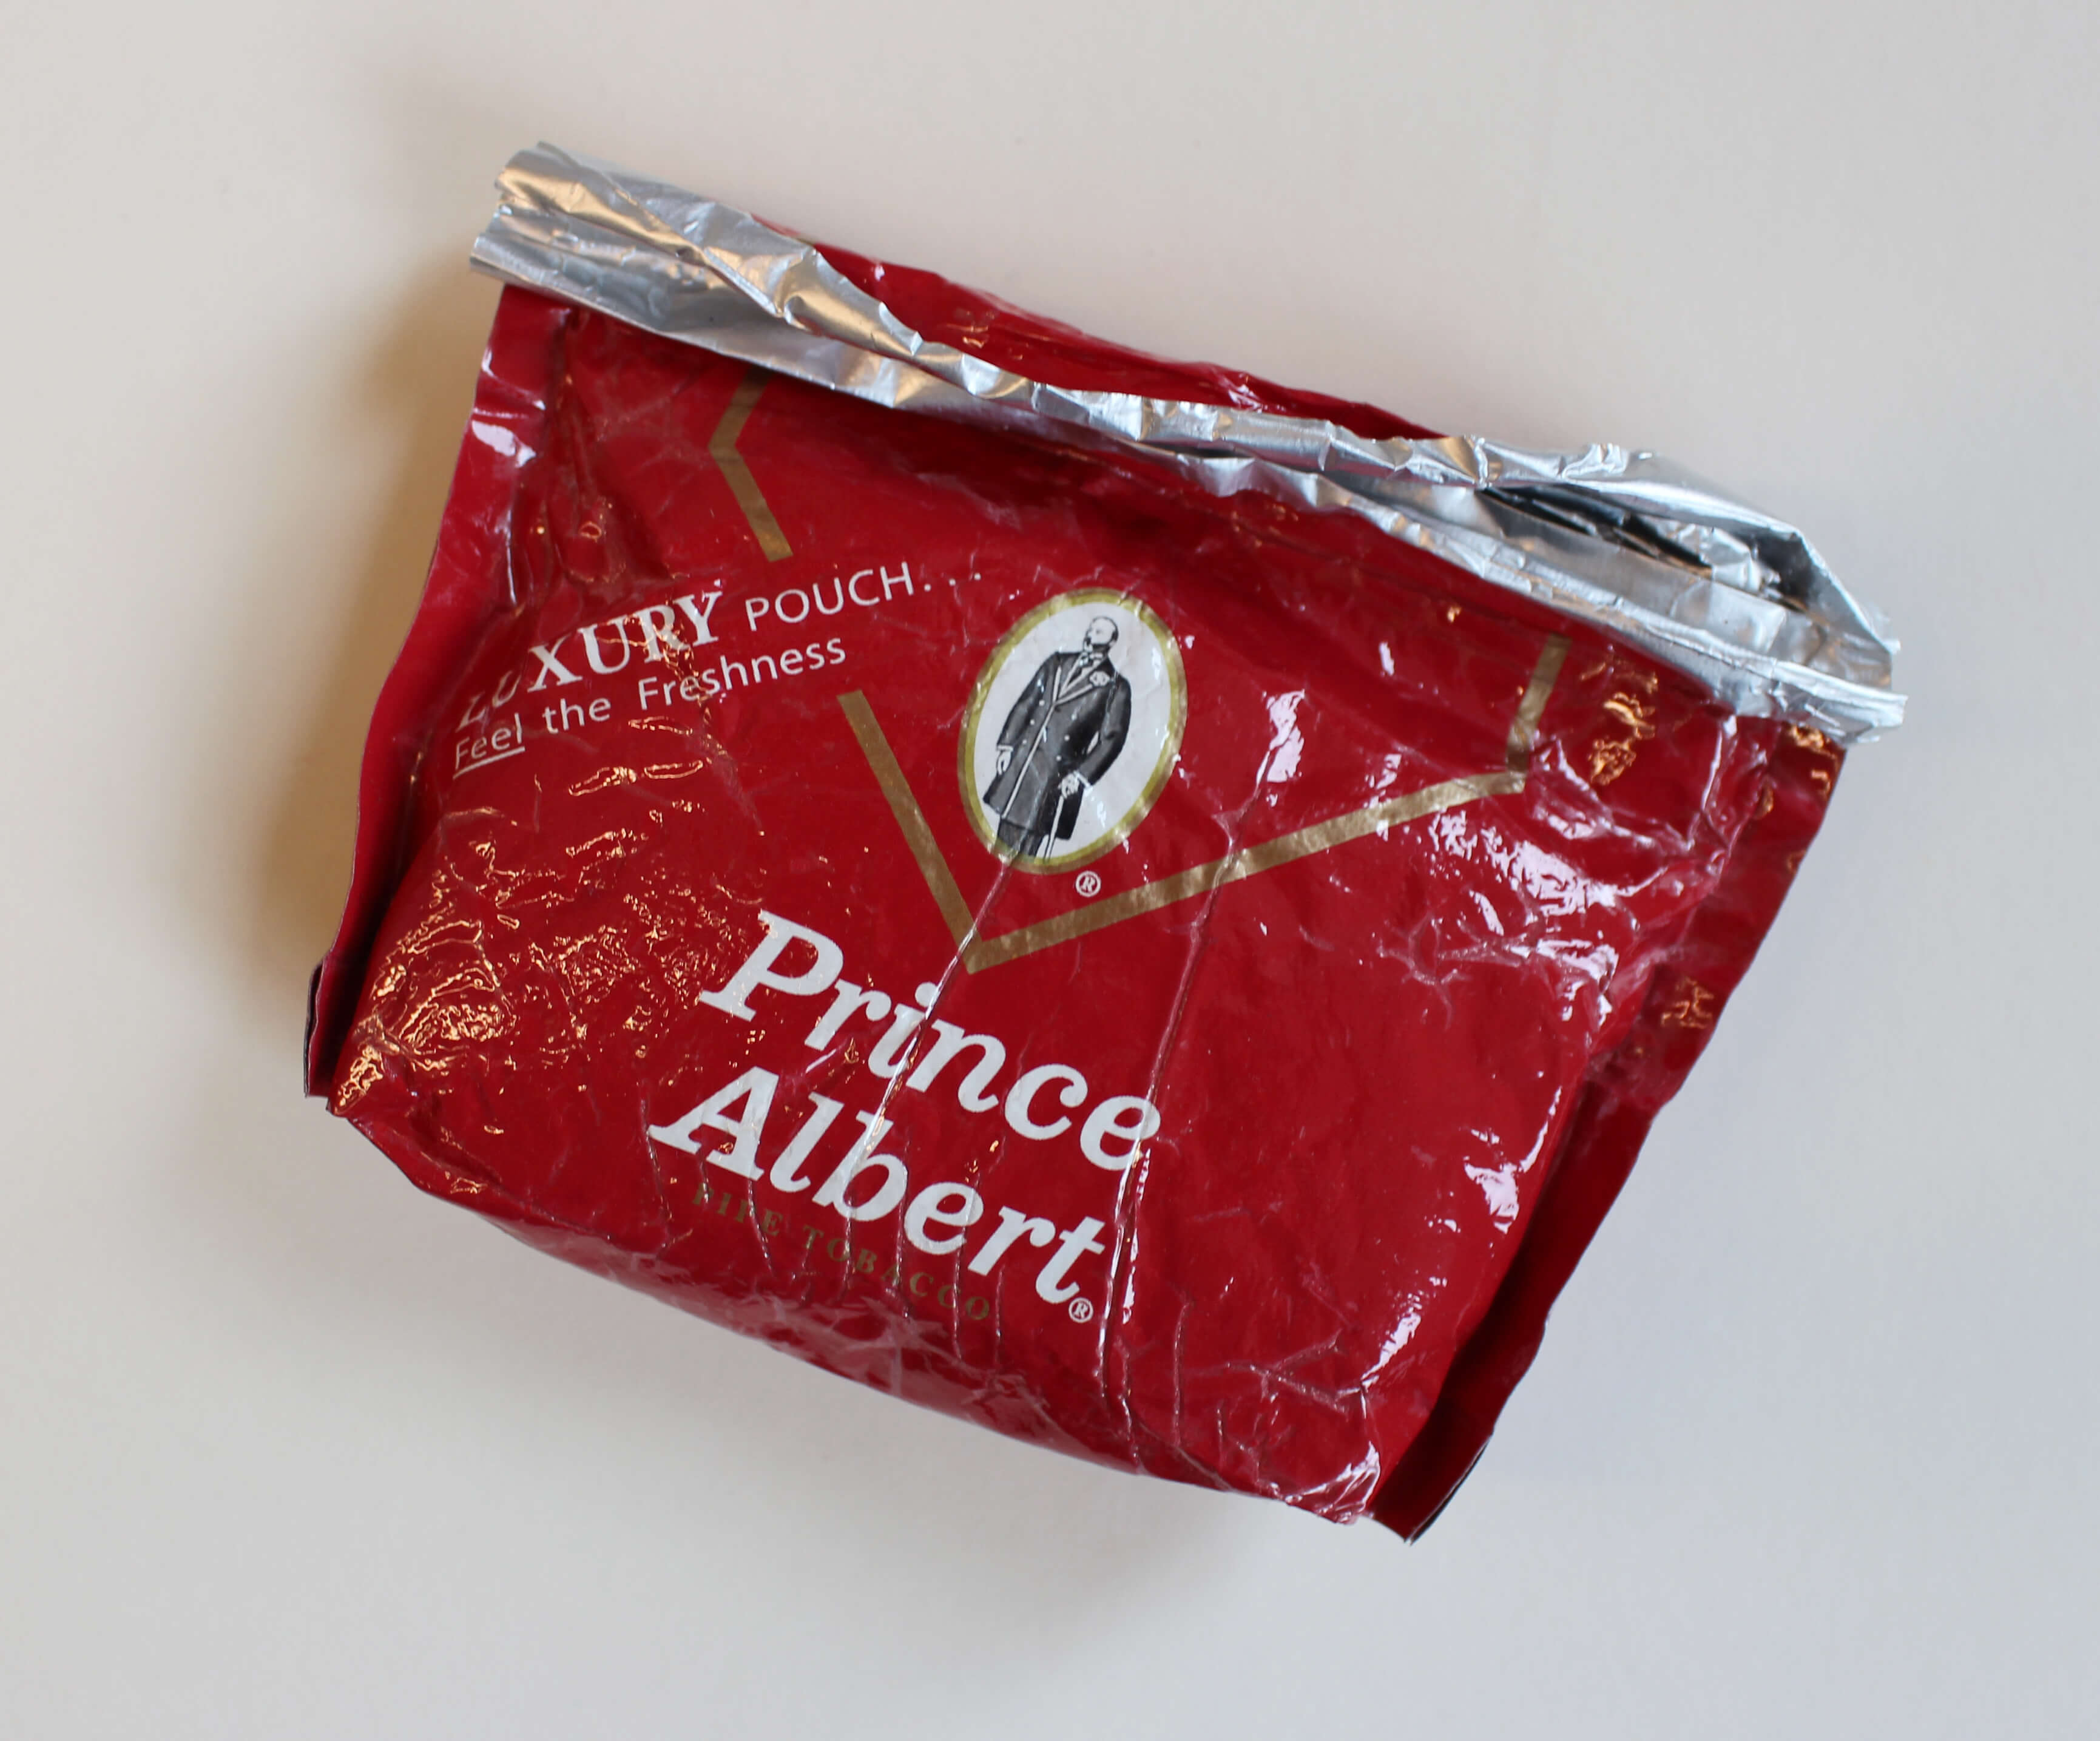 Red package of Prince Albert Tobacco.